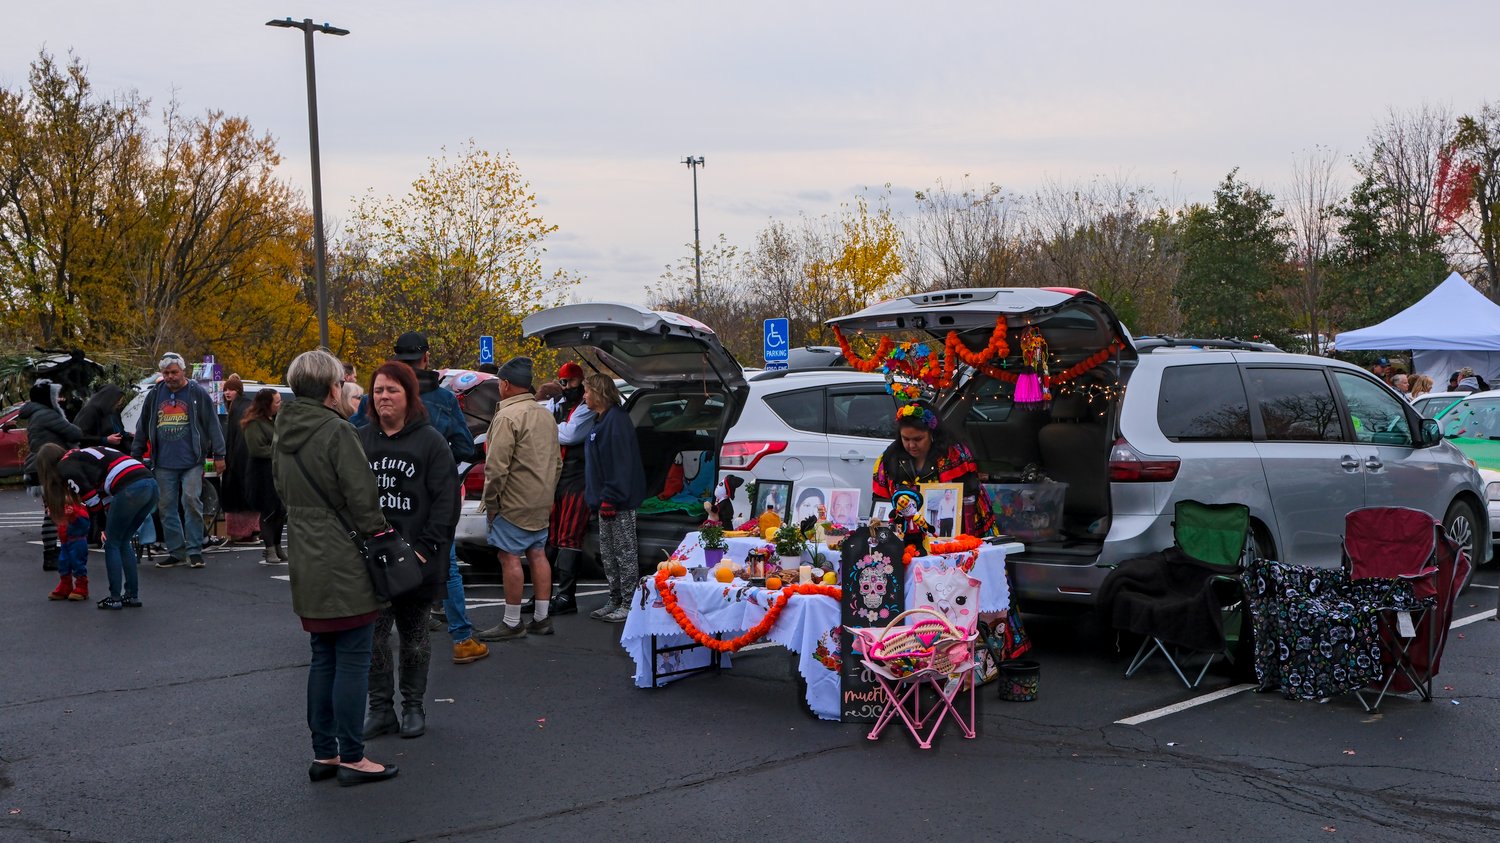 Trunk or treat set up at the Fall Fest.